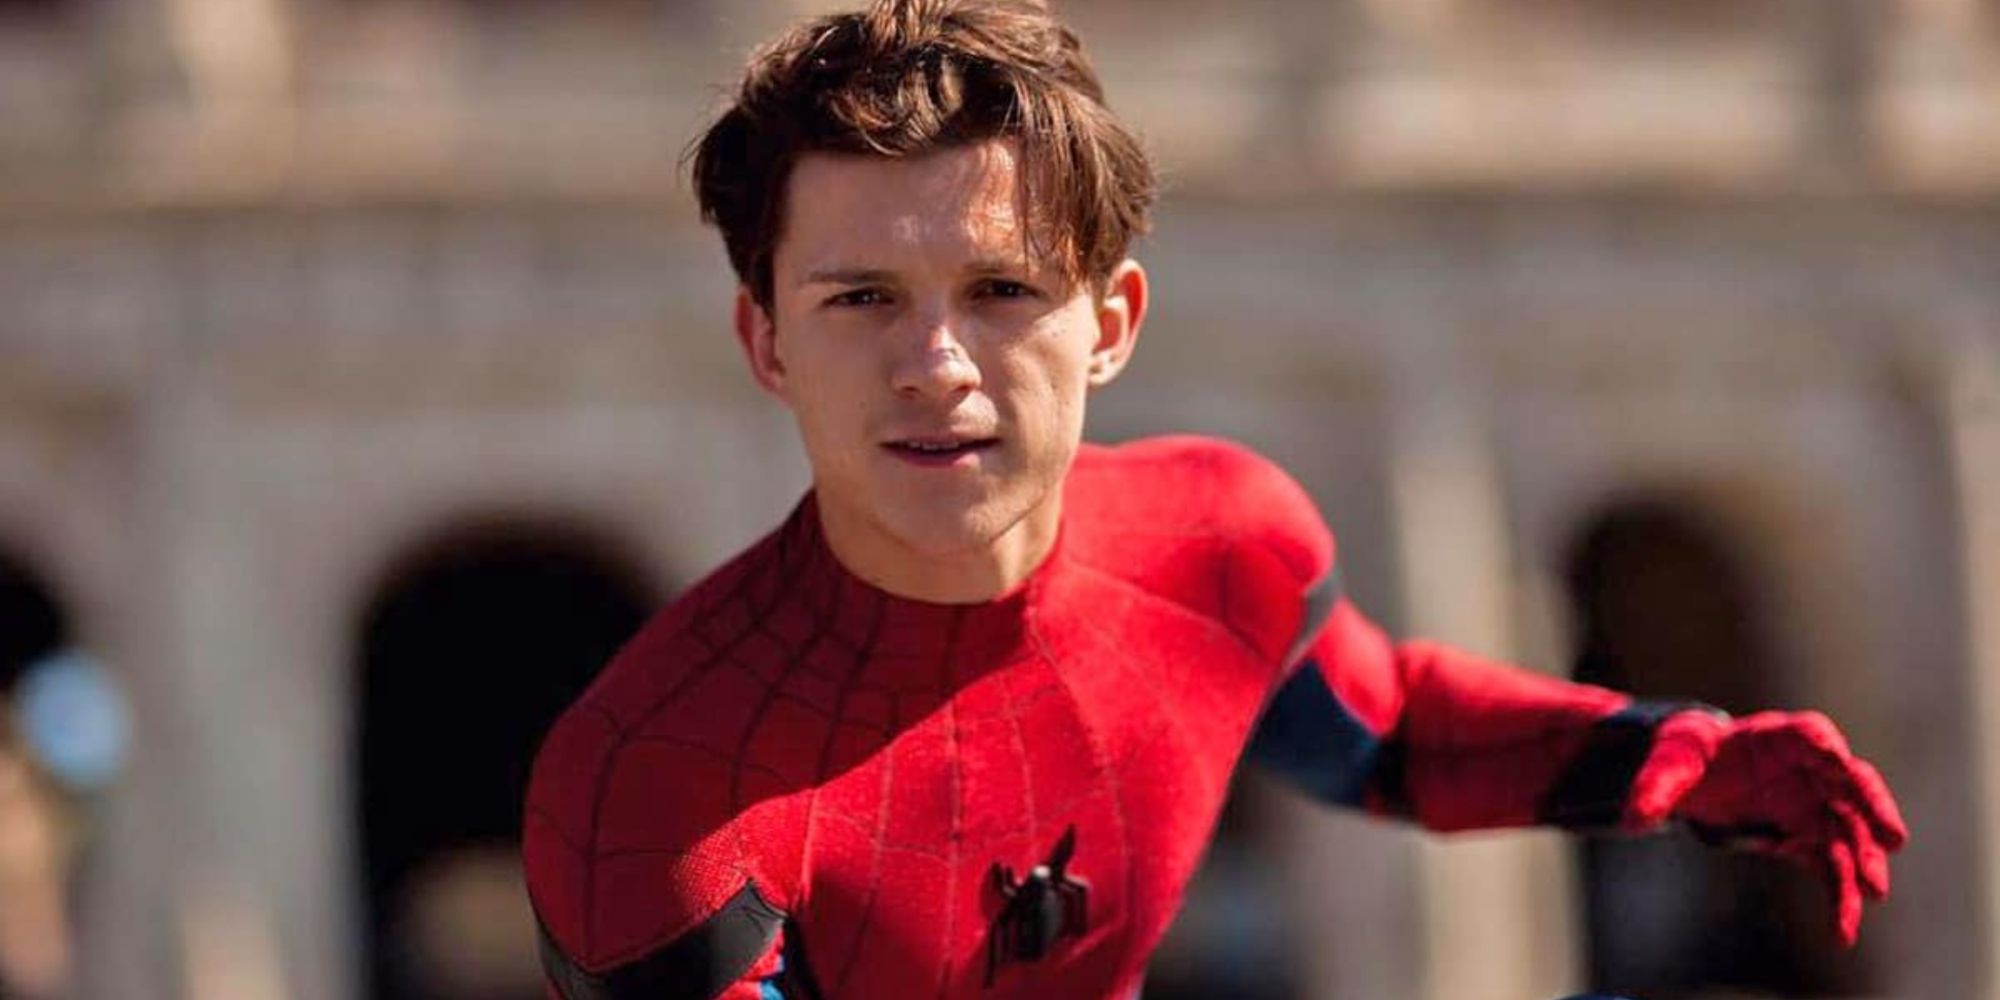 Spider-Man as portrayed by Tom Holland in the MCU.